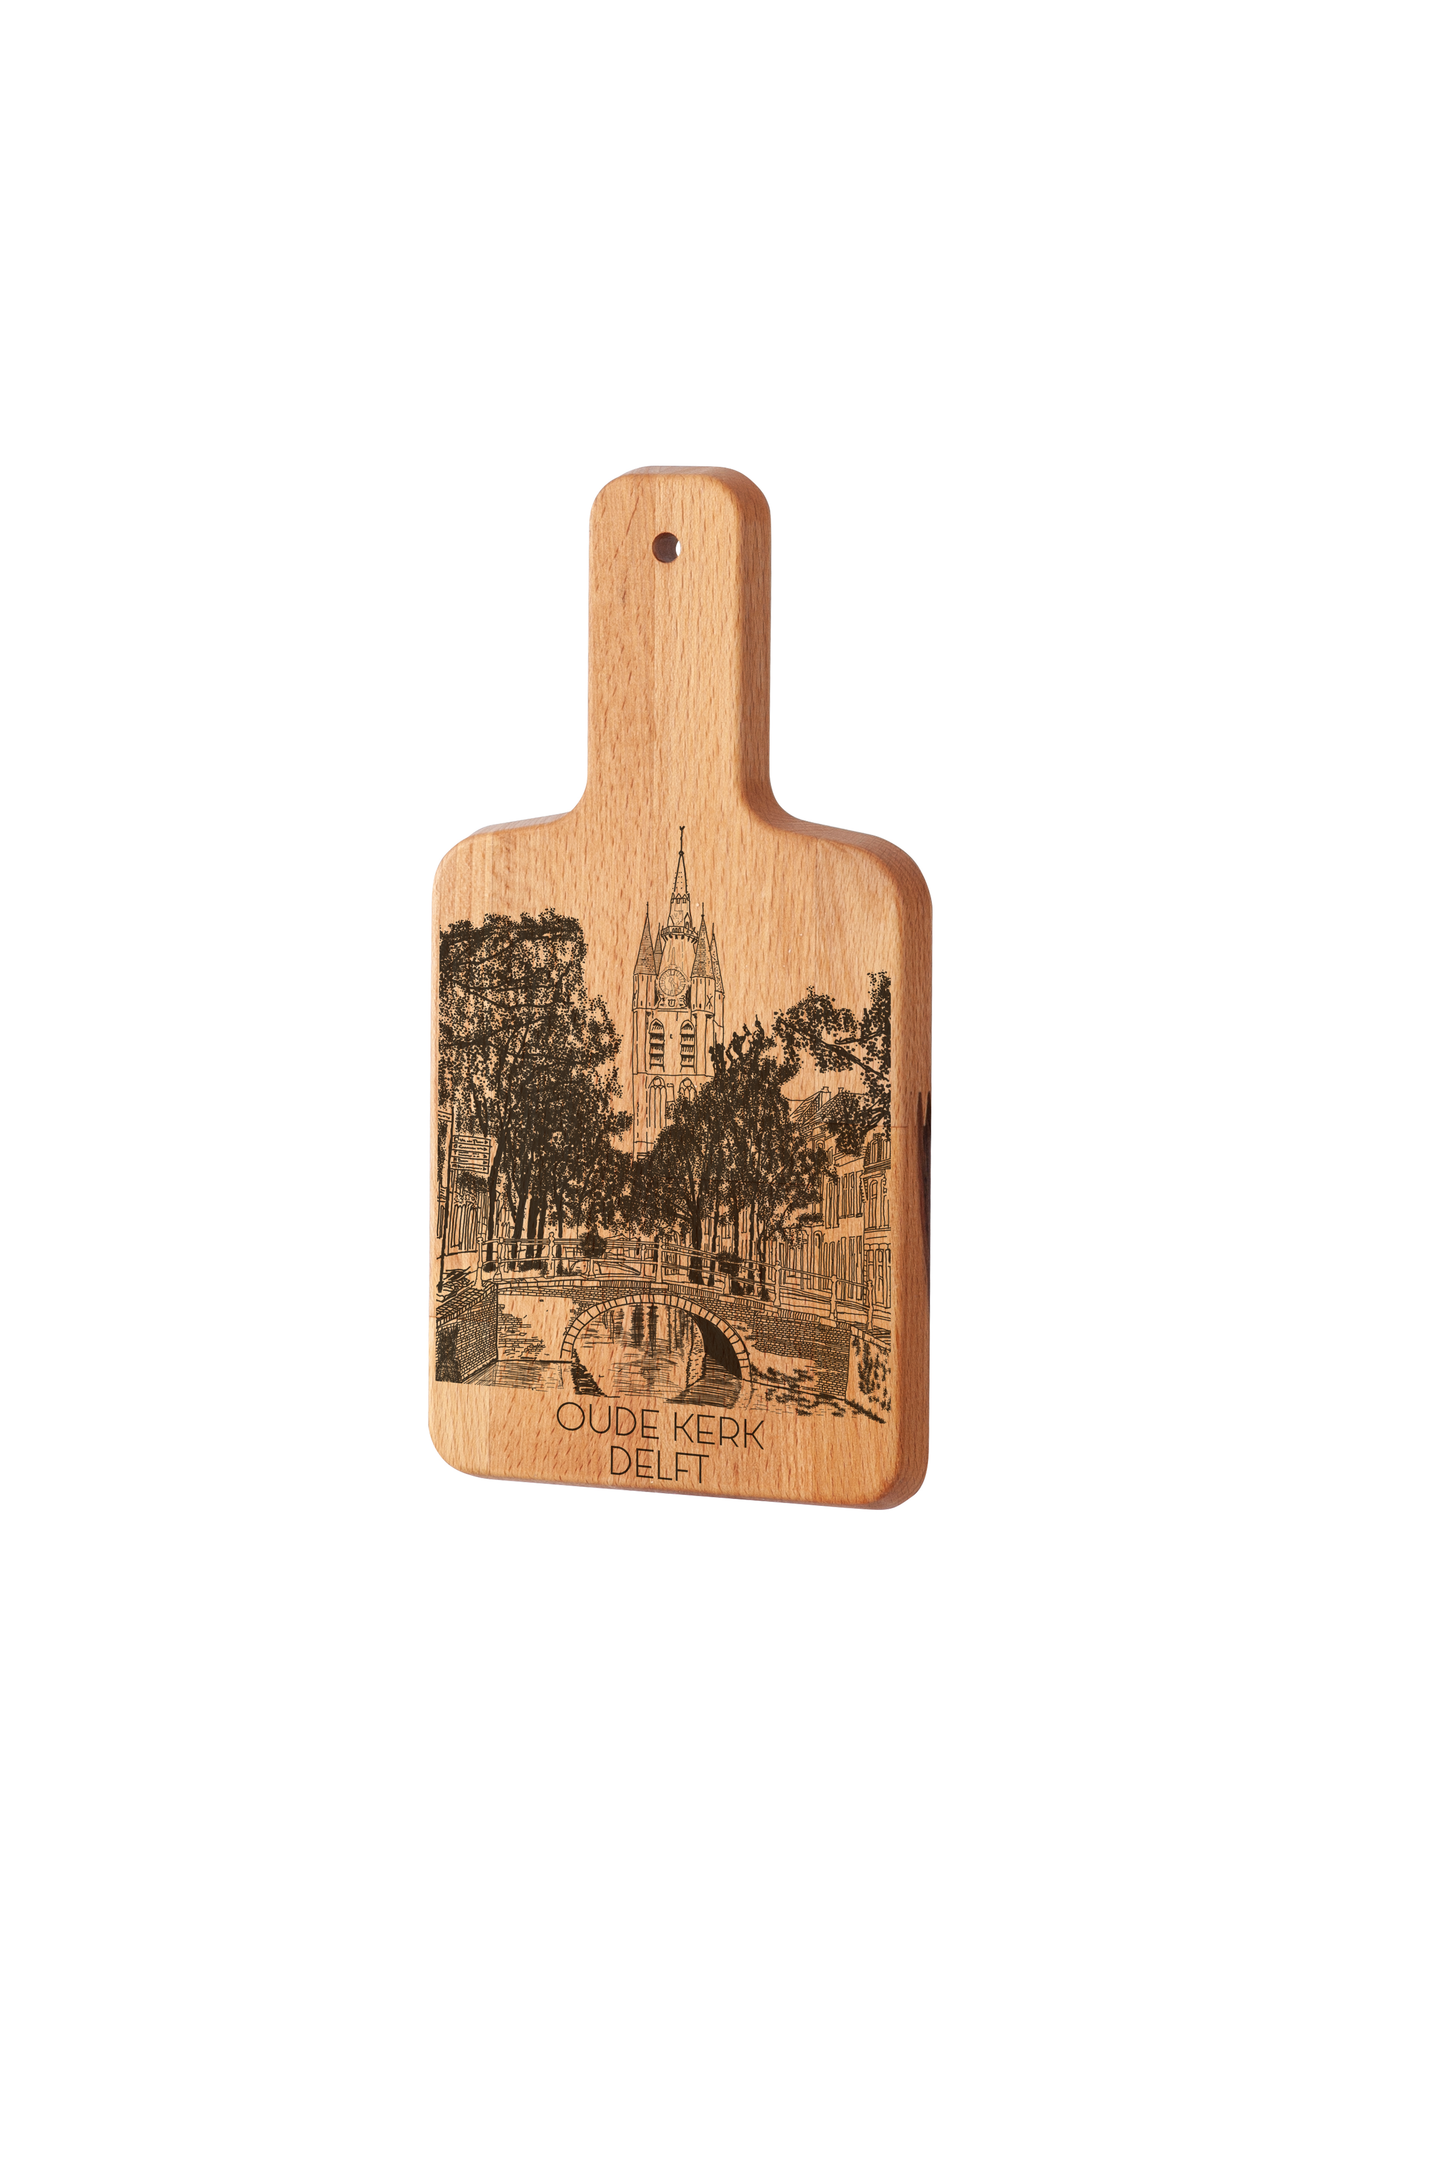 Delft, Oude Kerk, cheese board, side view